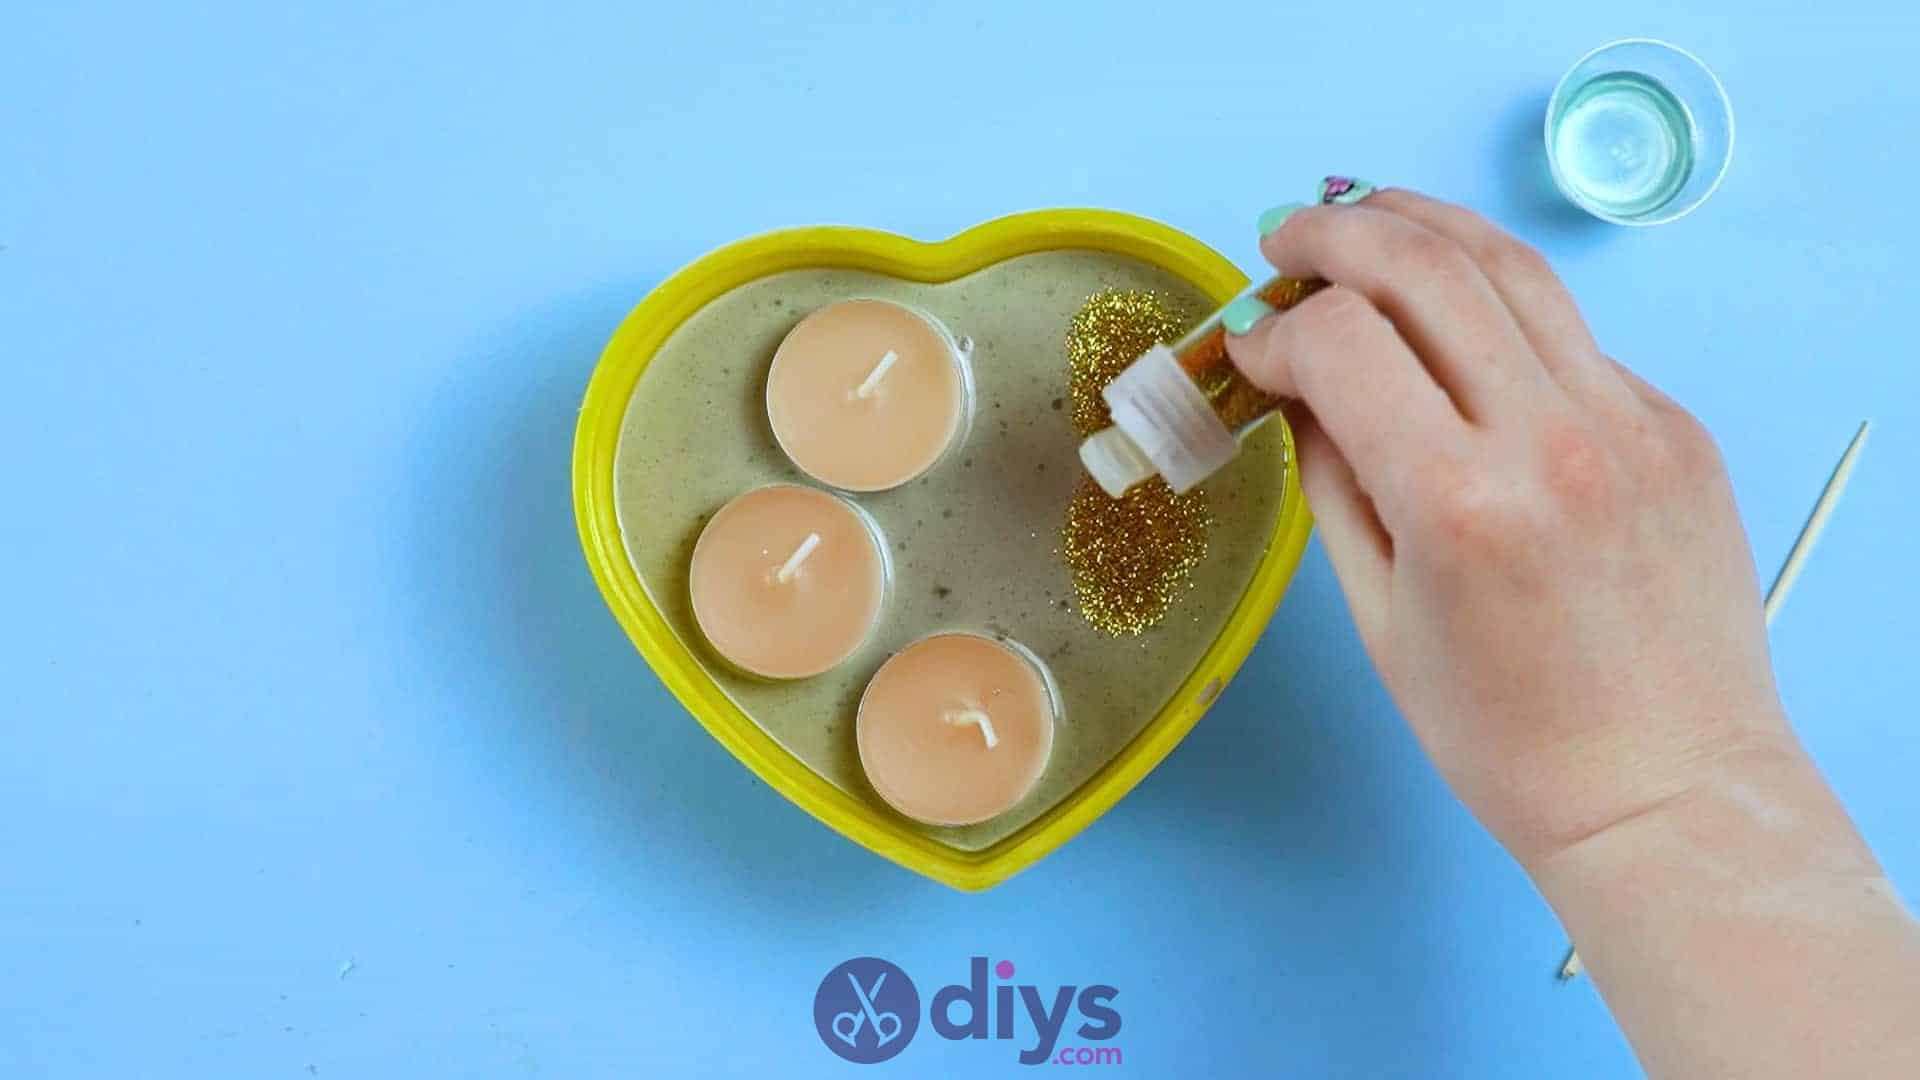 Diy concrete heart candle holder step 6